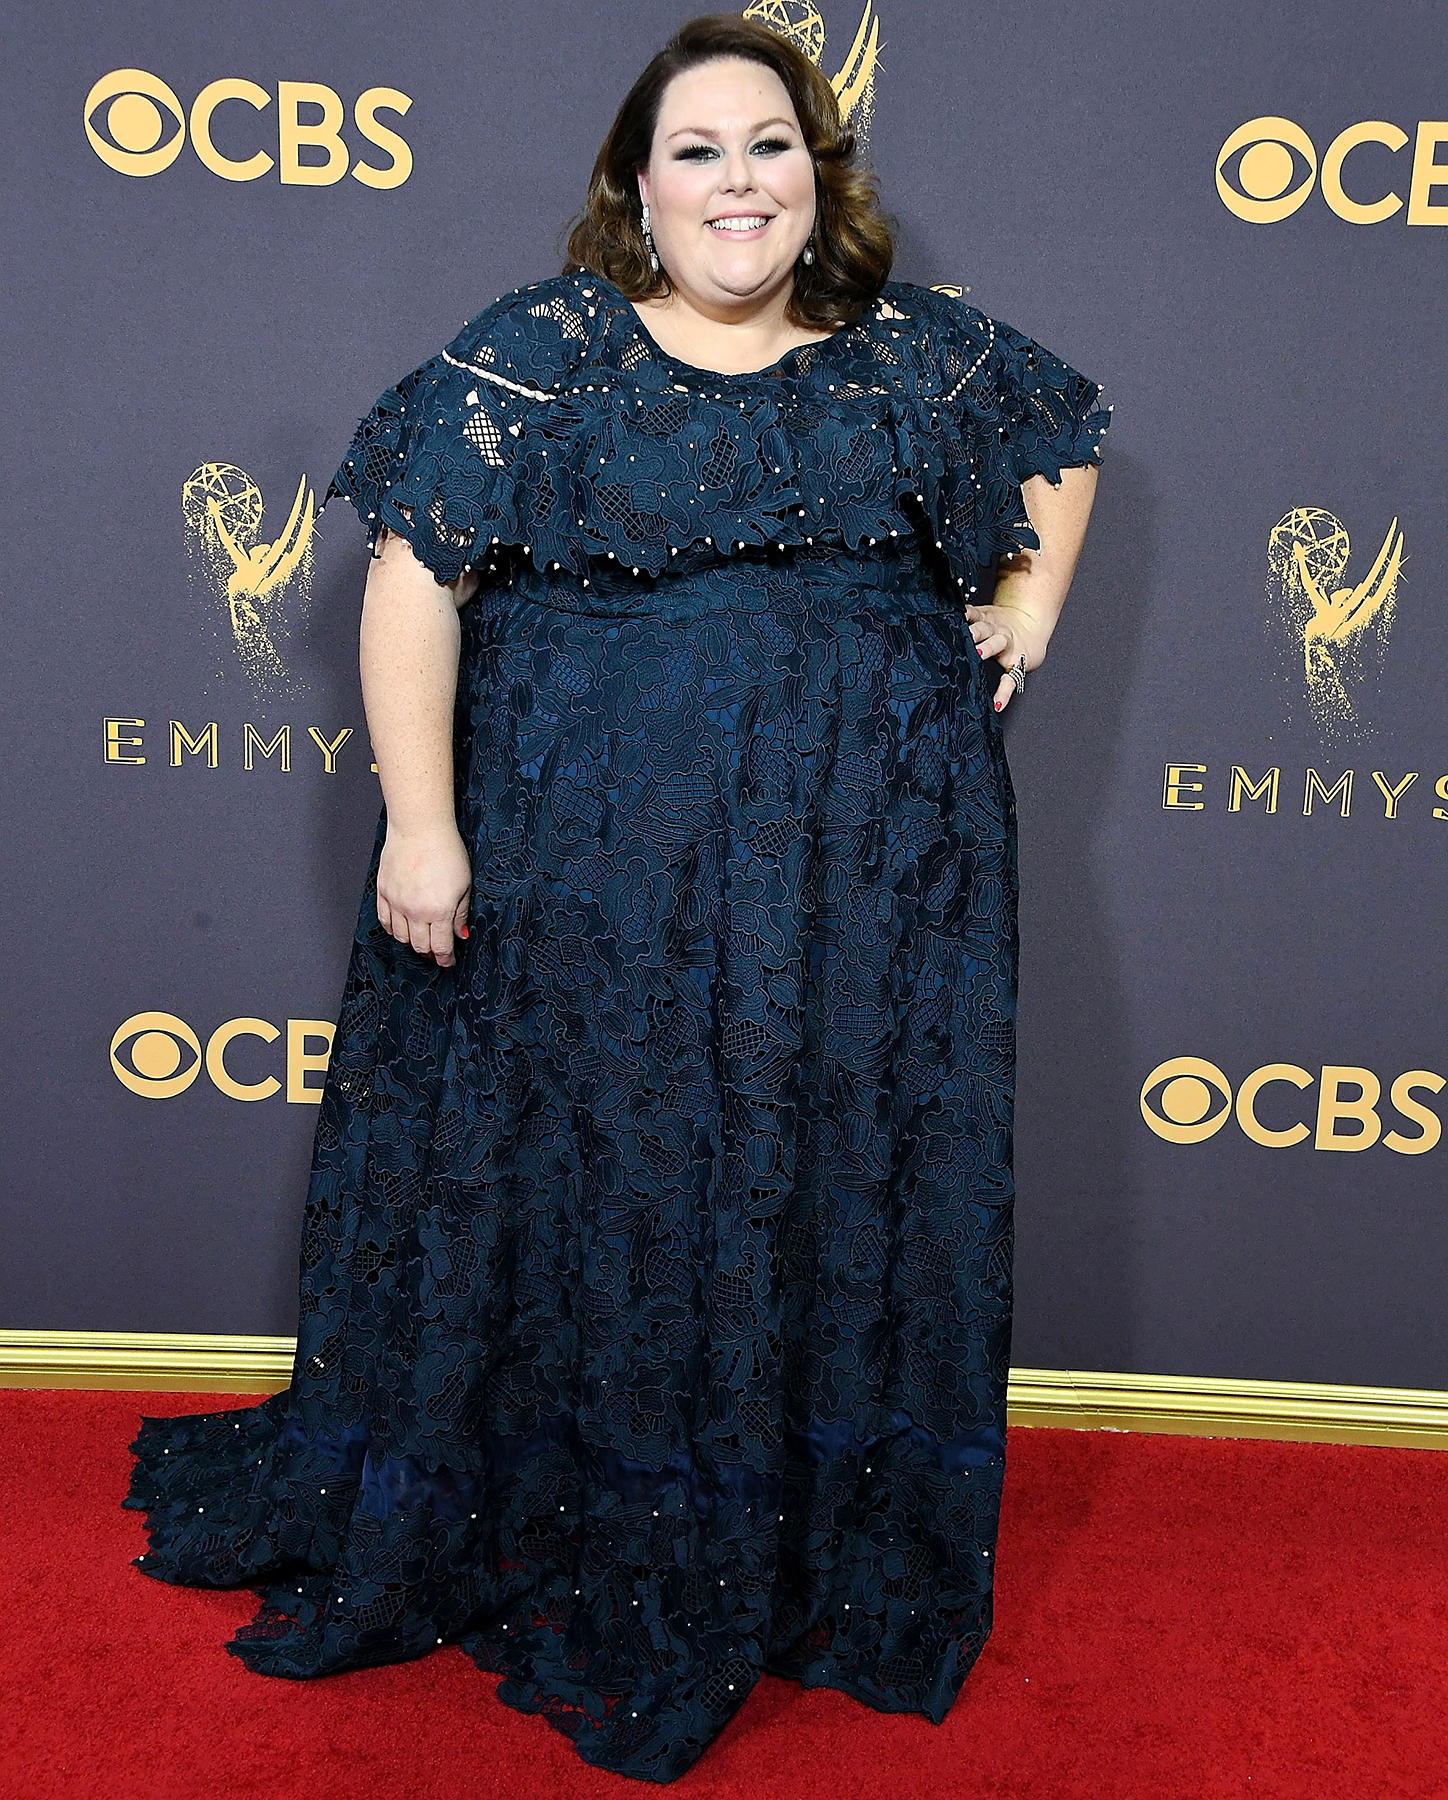 Chrissy Metz: Don’t Ask Me About Gastric Bypass Surgery